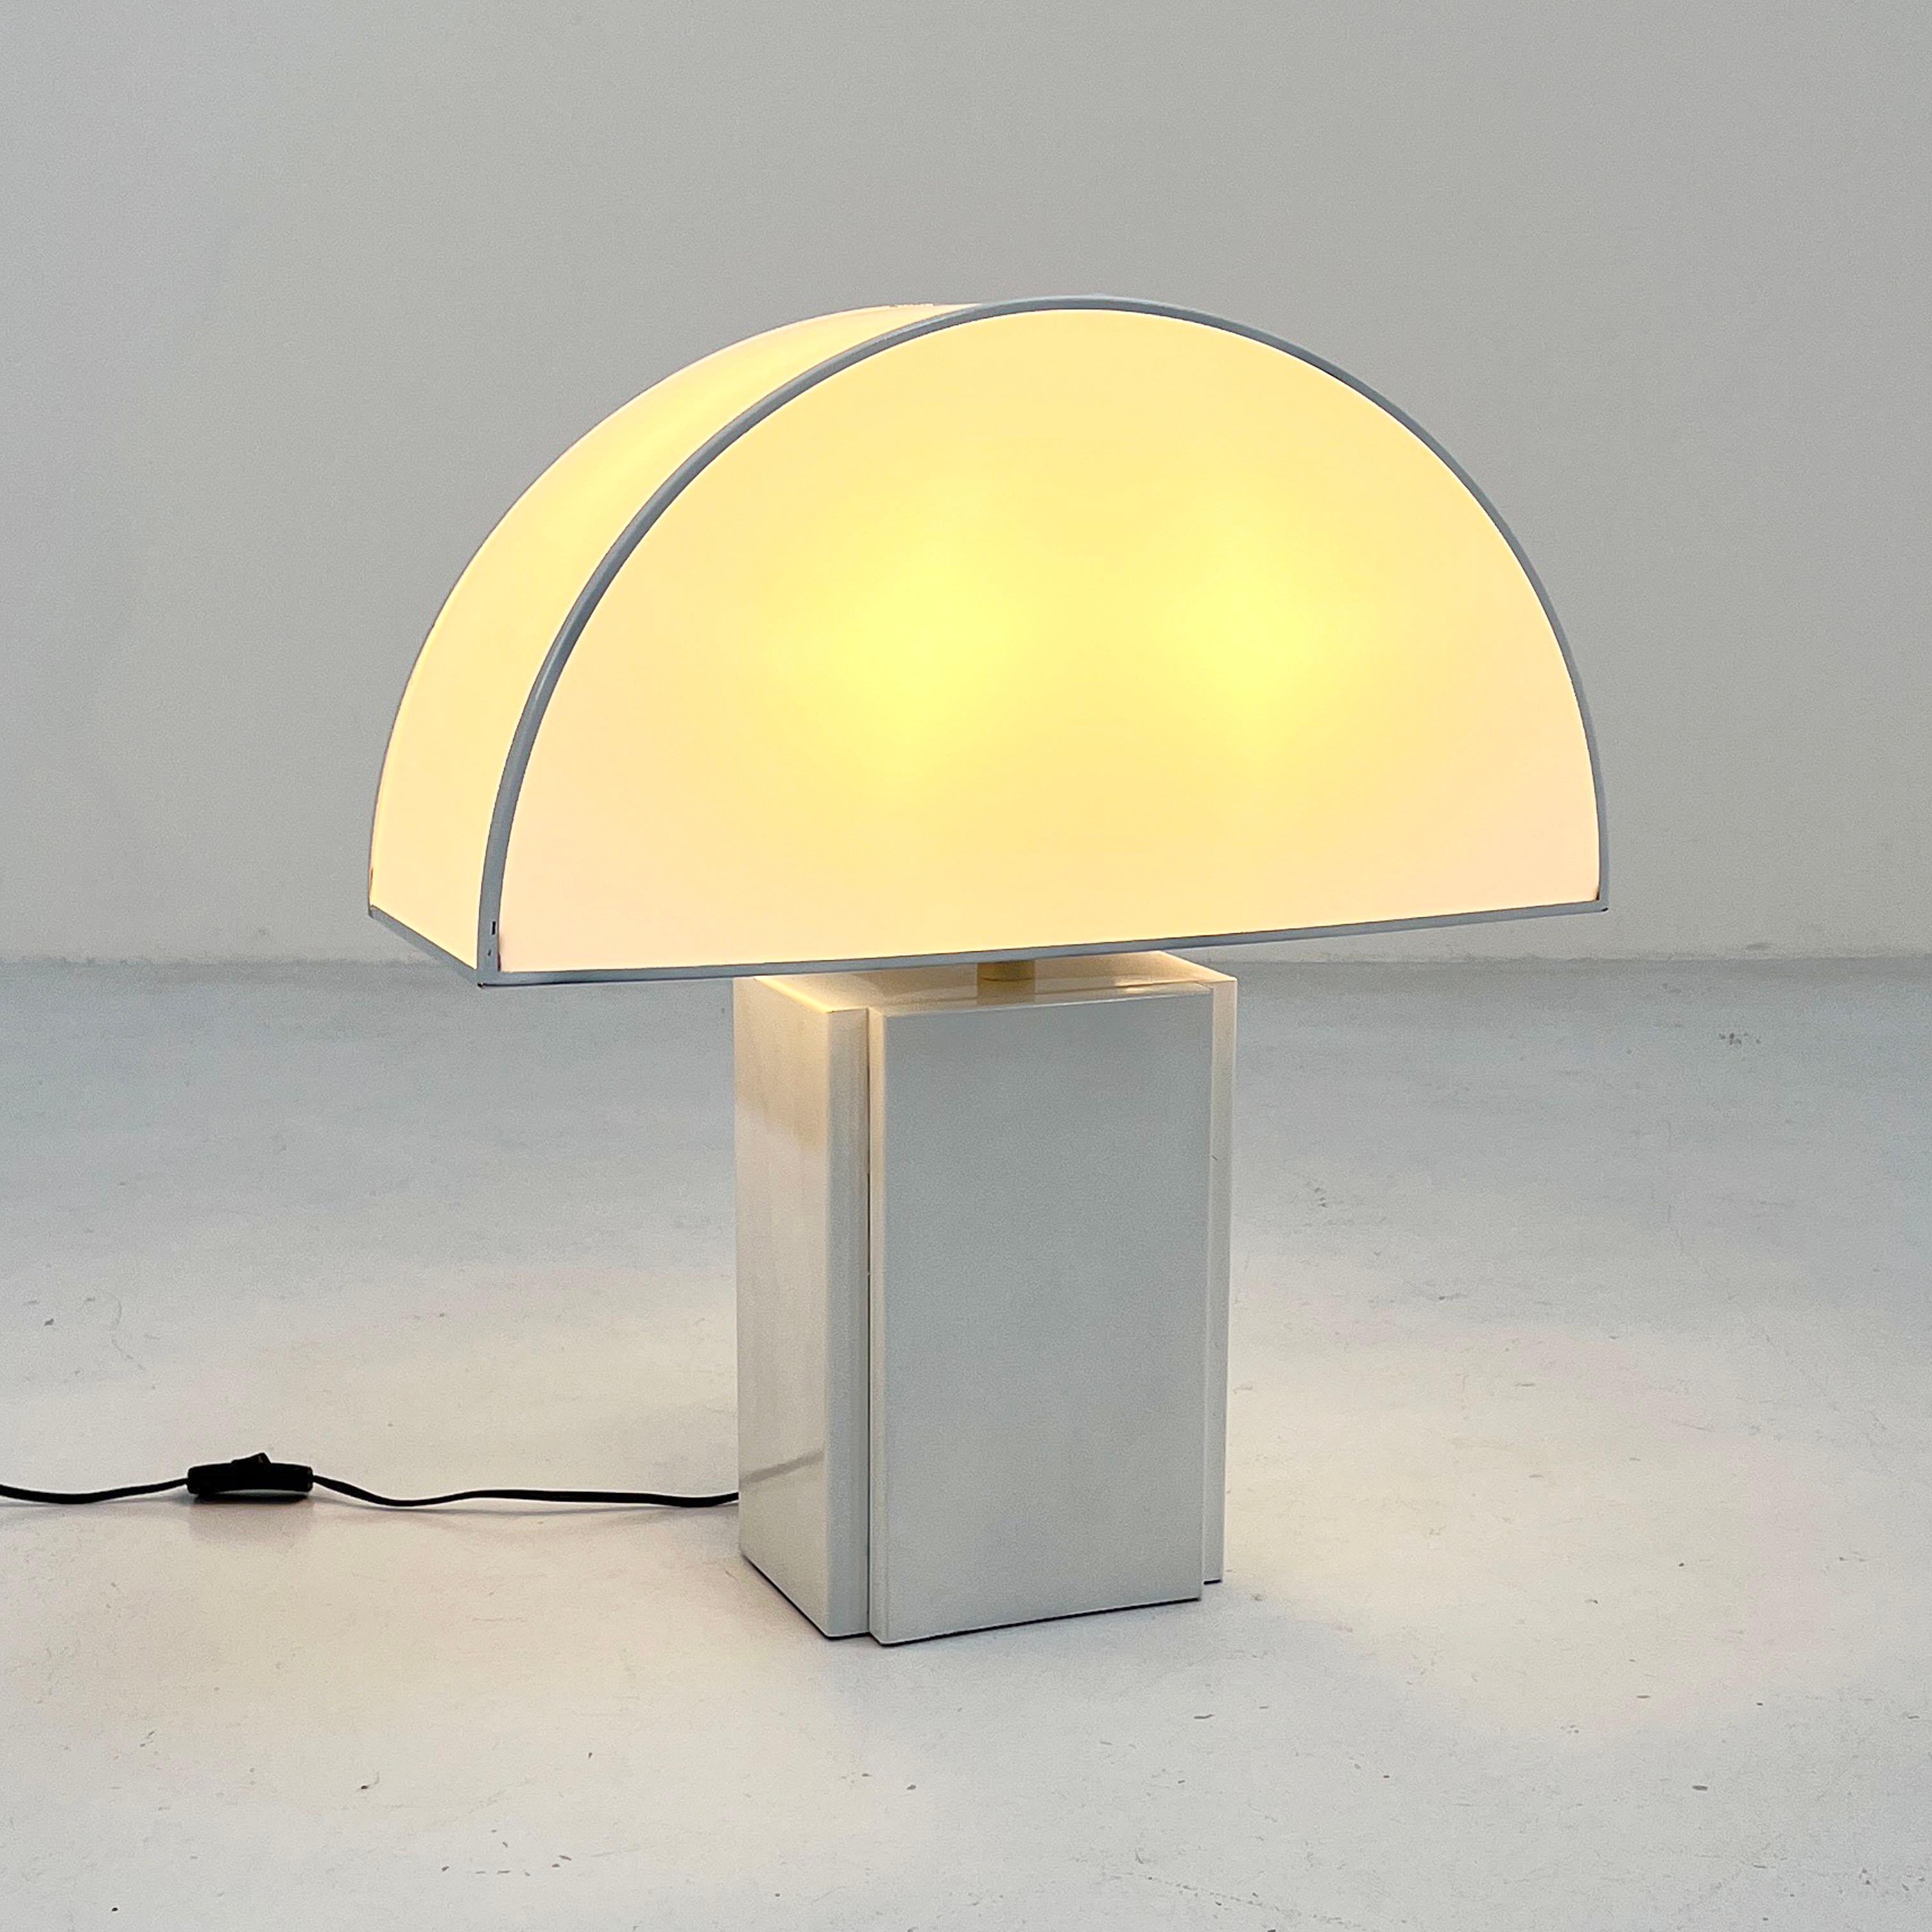 Producer - ED
Designer - Harvey Guzzini
Model - Olympe Table Lamp
Design Period - Seventies
Measurements - Width 55 cm x Depth 20 cm x Height 60 cm 
Materials - Metal, Plastic
Color - White
Light wear consistent with age and use. Some light scuffs